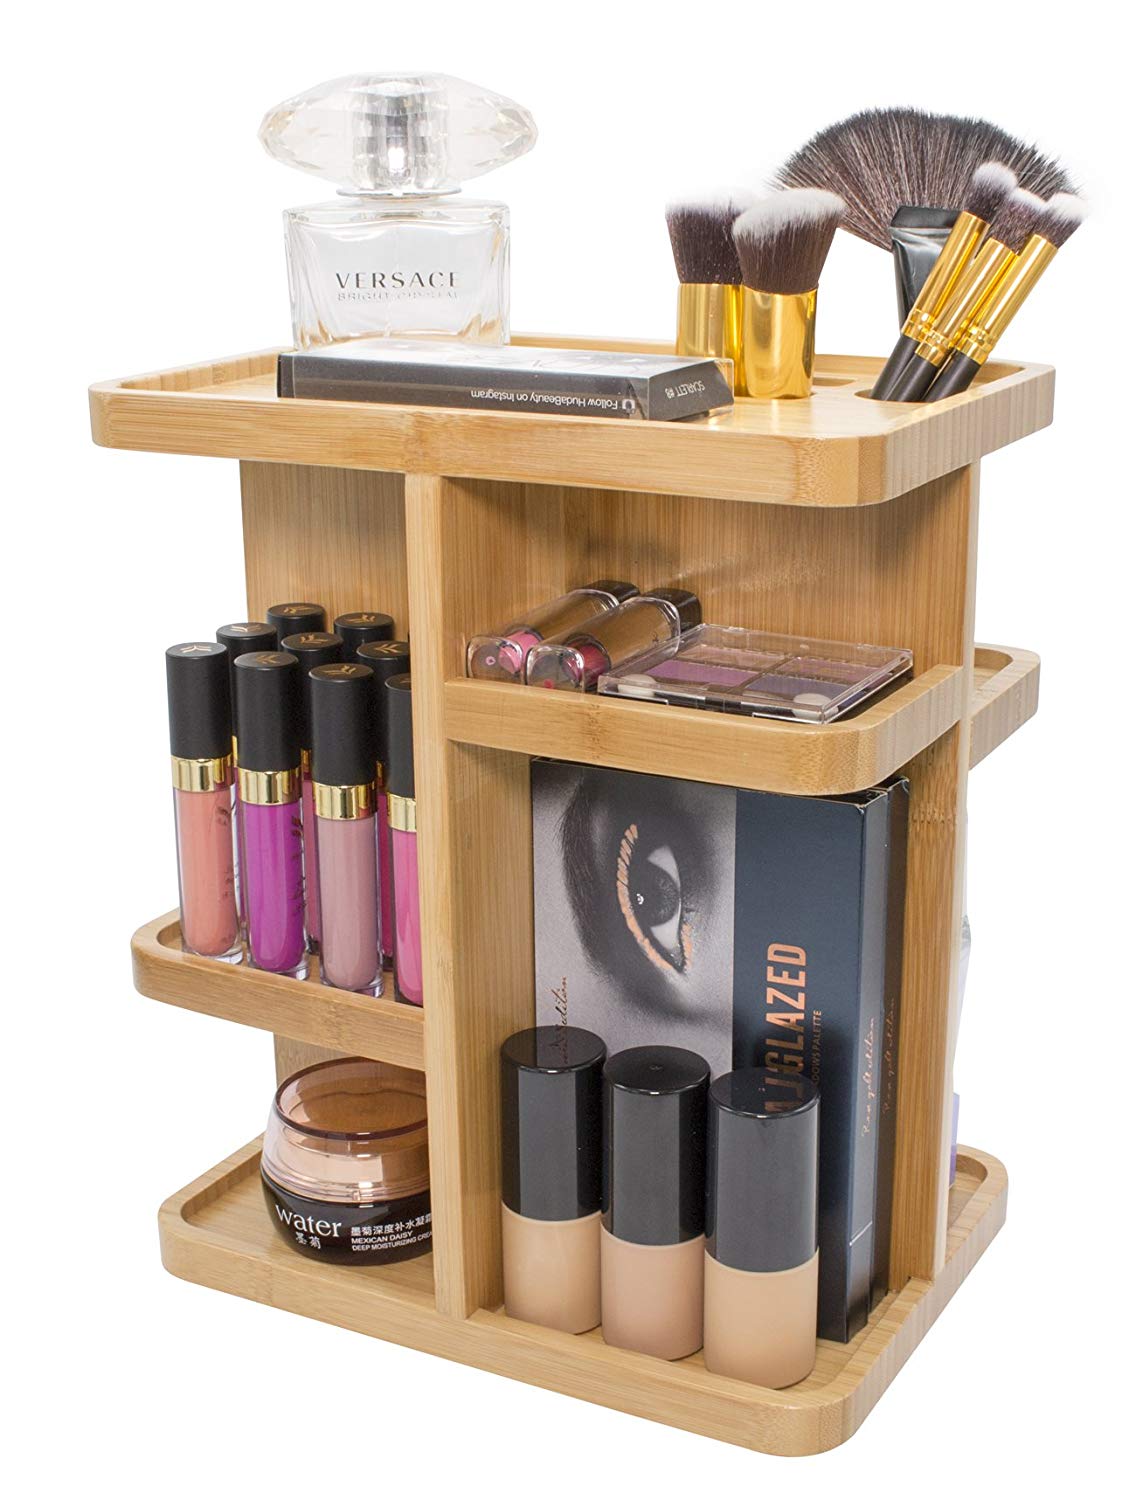 Sorbus 360° Bamboo Cosmetic Organizer, Multi-Function Storage Carousel for Makeup, Toiletries, and More — for Vanity, Desk, Bathroom, Bedroom, Closet, Kitchen